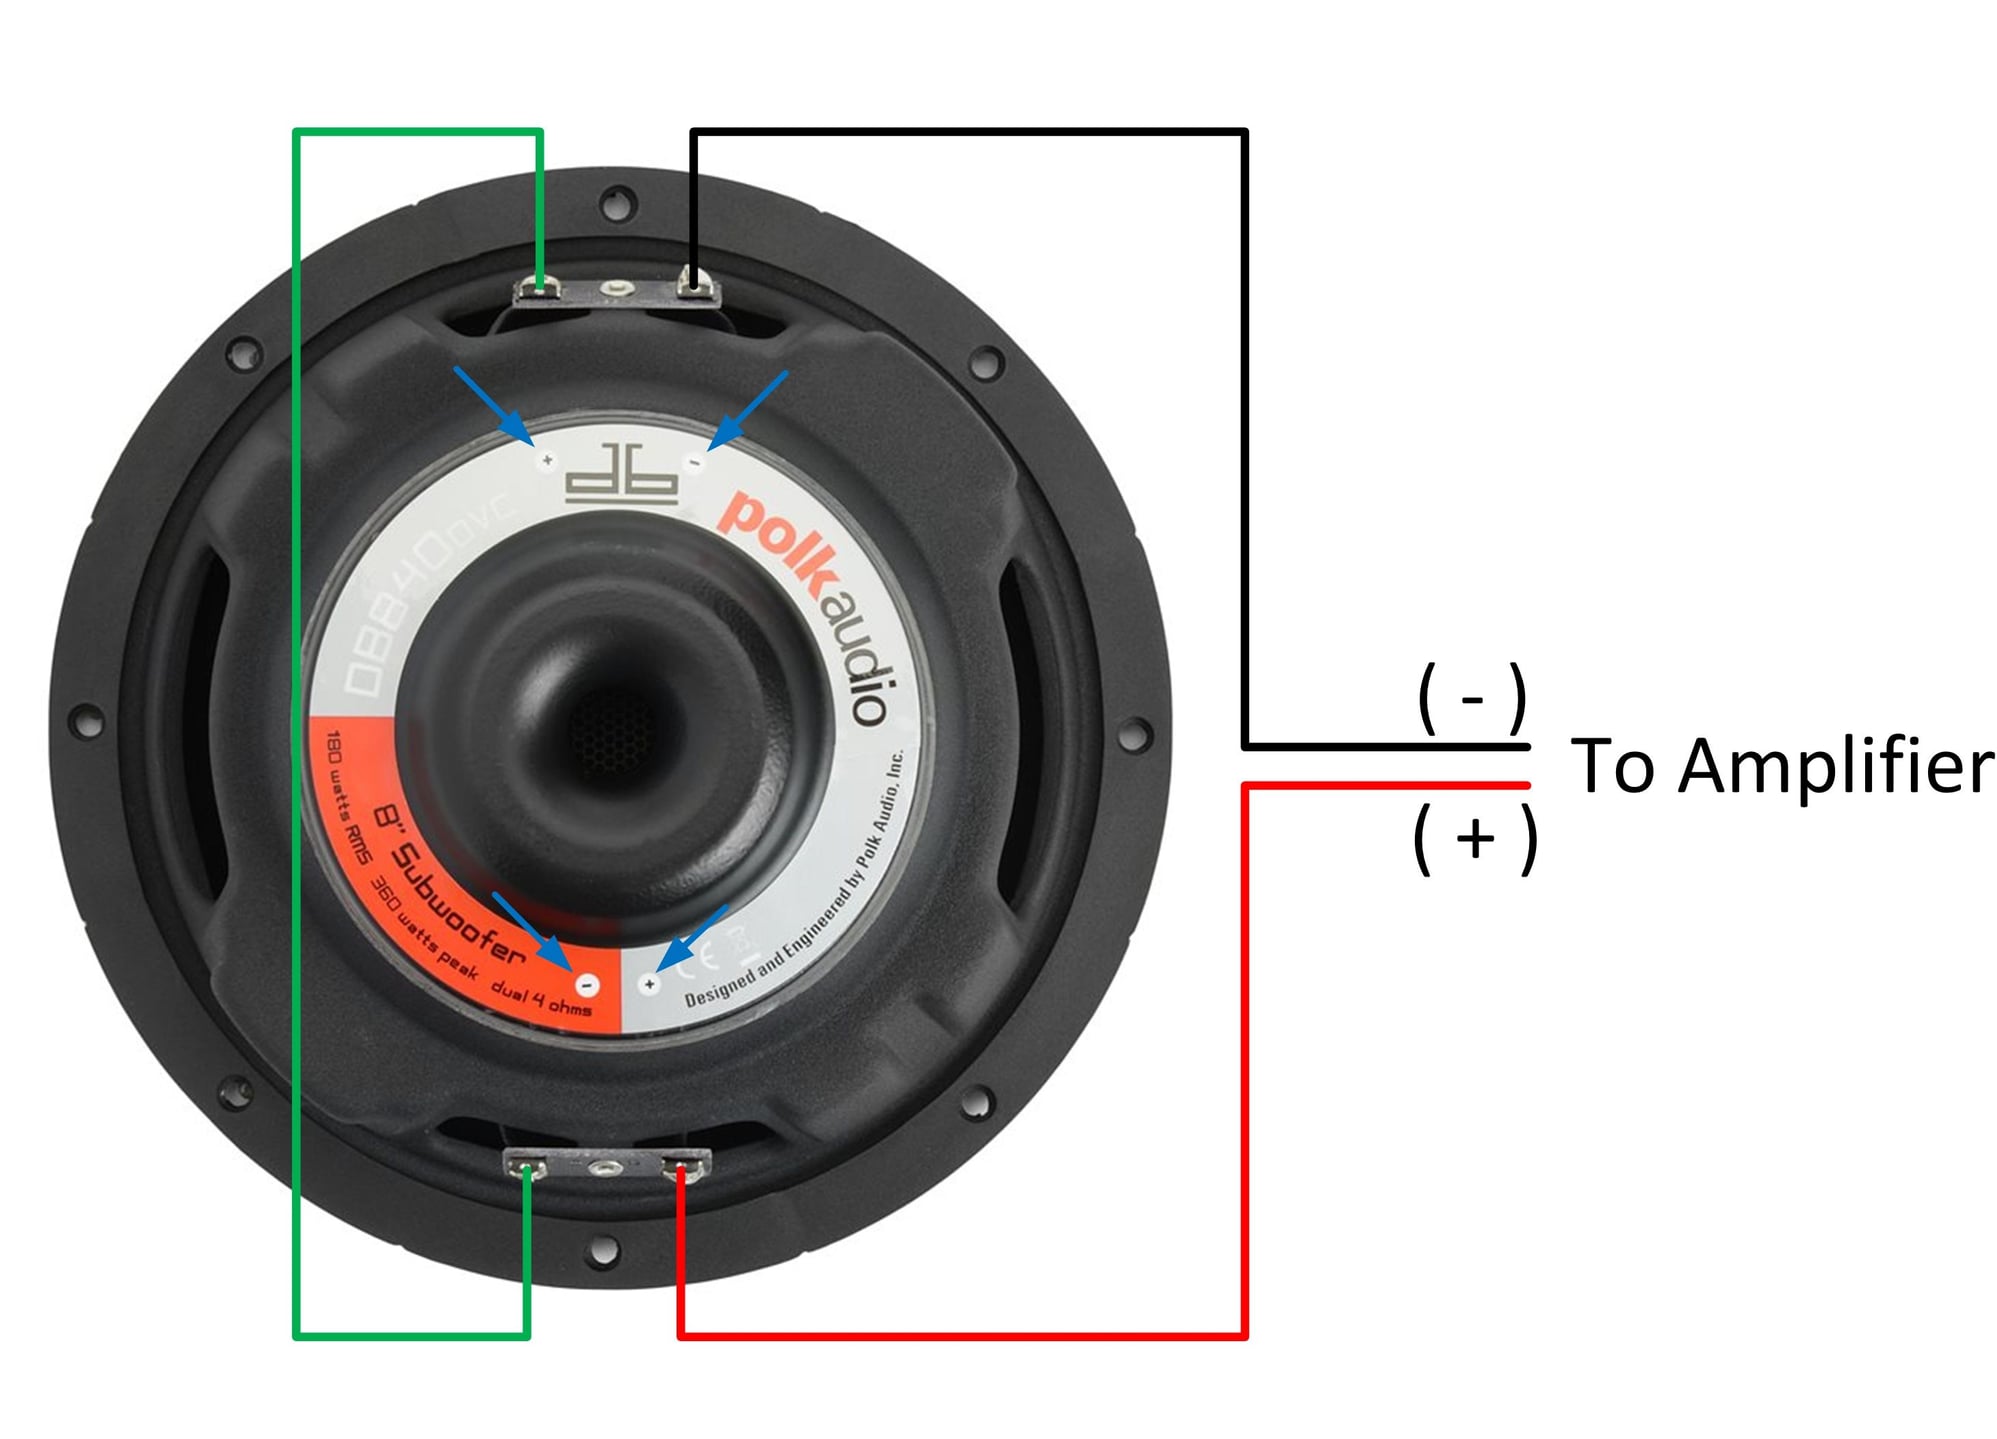 Is this sub-woofer comparable with 2004 ML system? - ClubLexus - Lexus ...